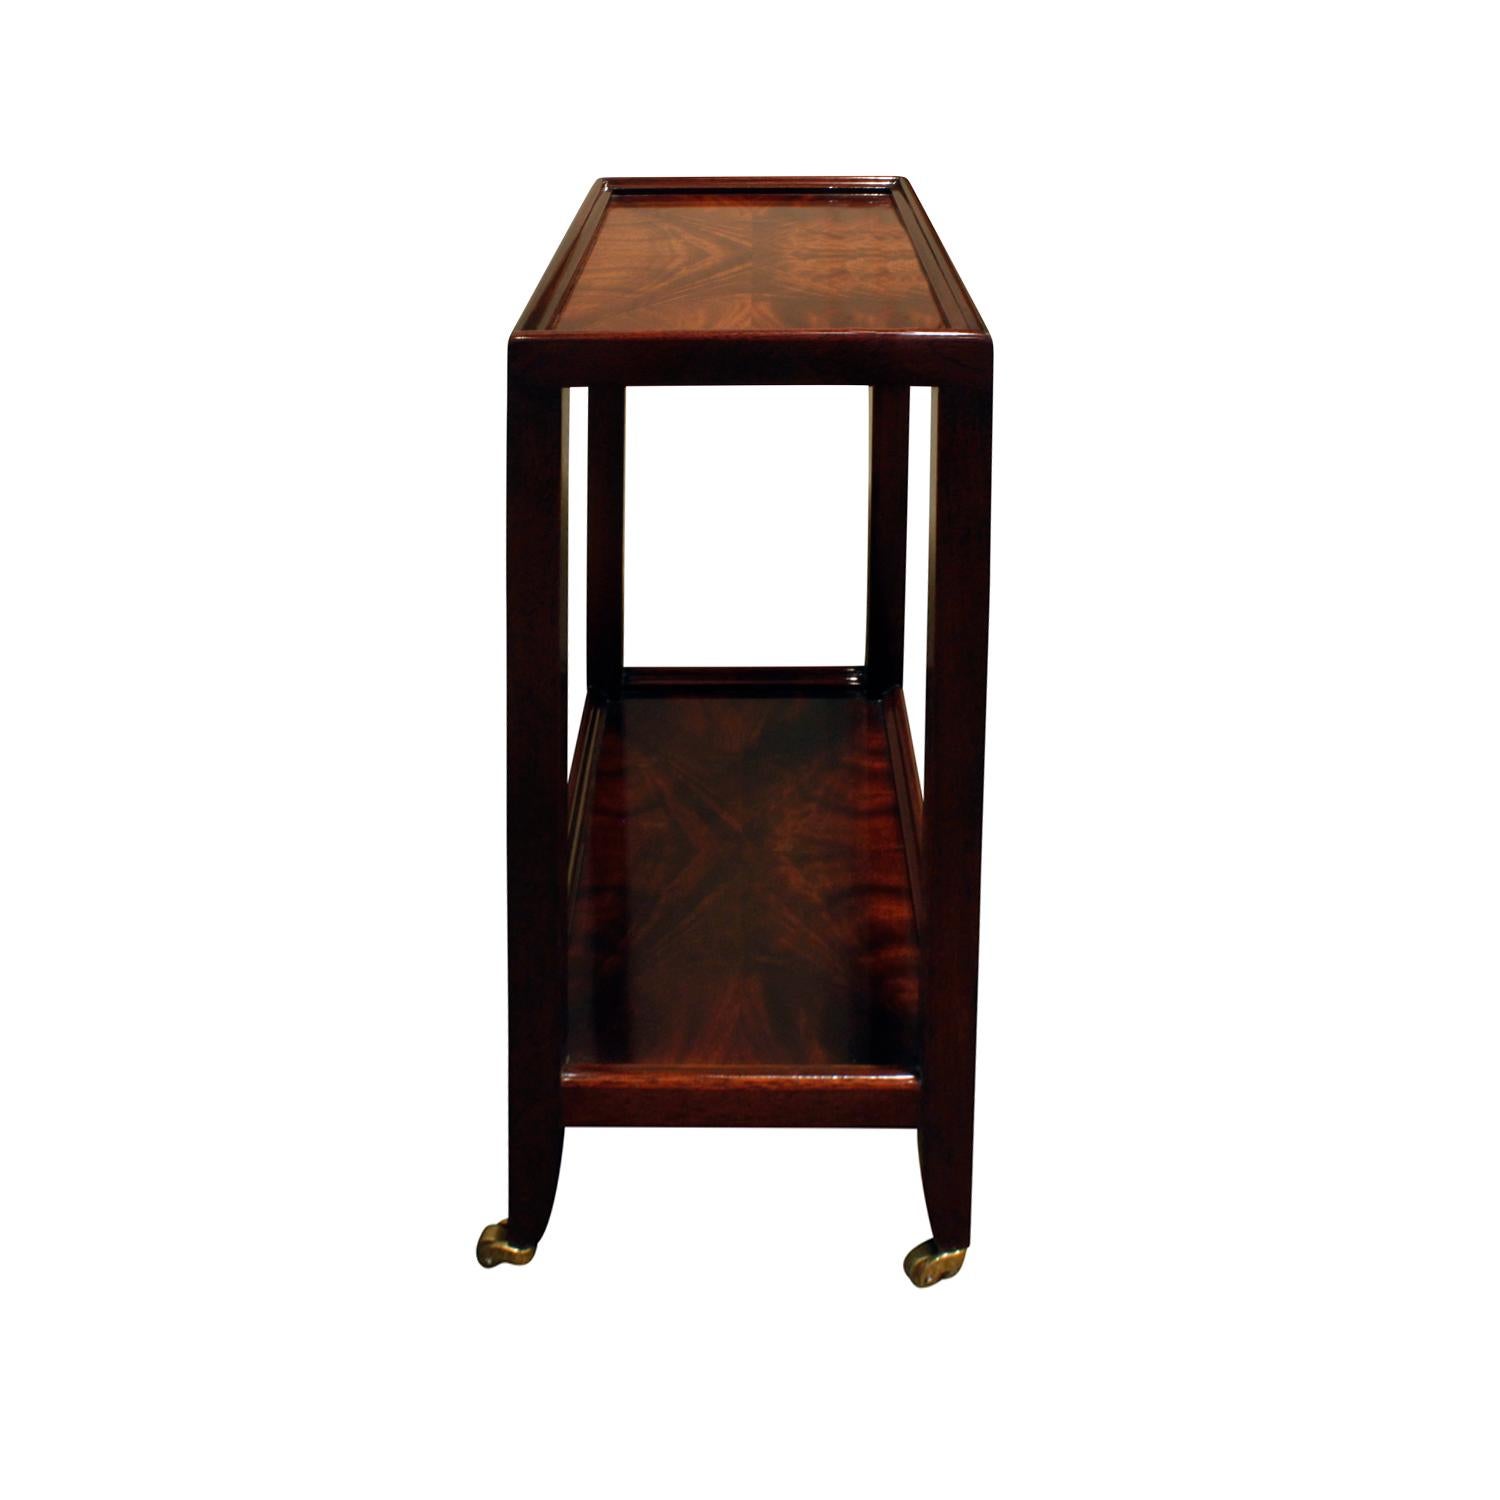 Modern Karl Springer Telephone Table in Double Bookmatched Flame Mahogany, 2002